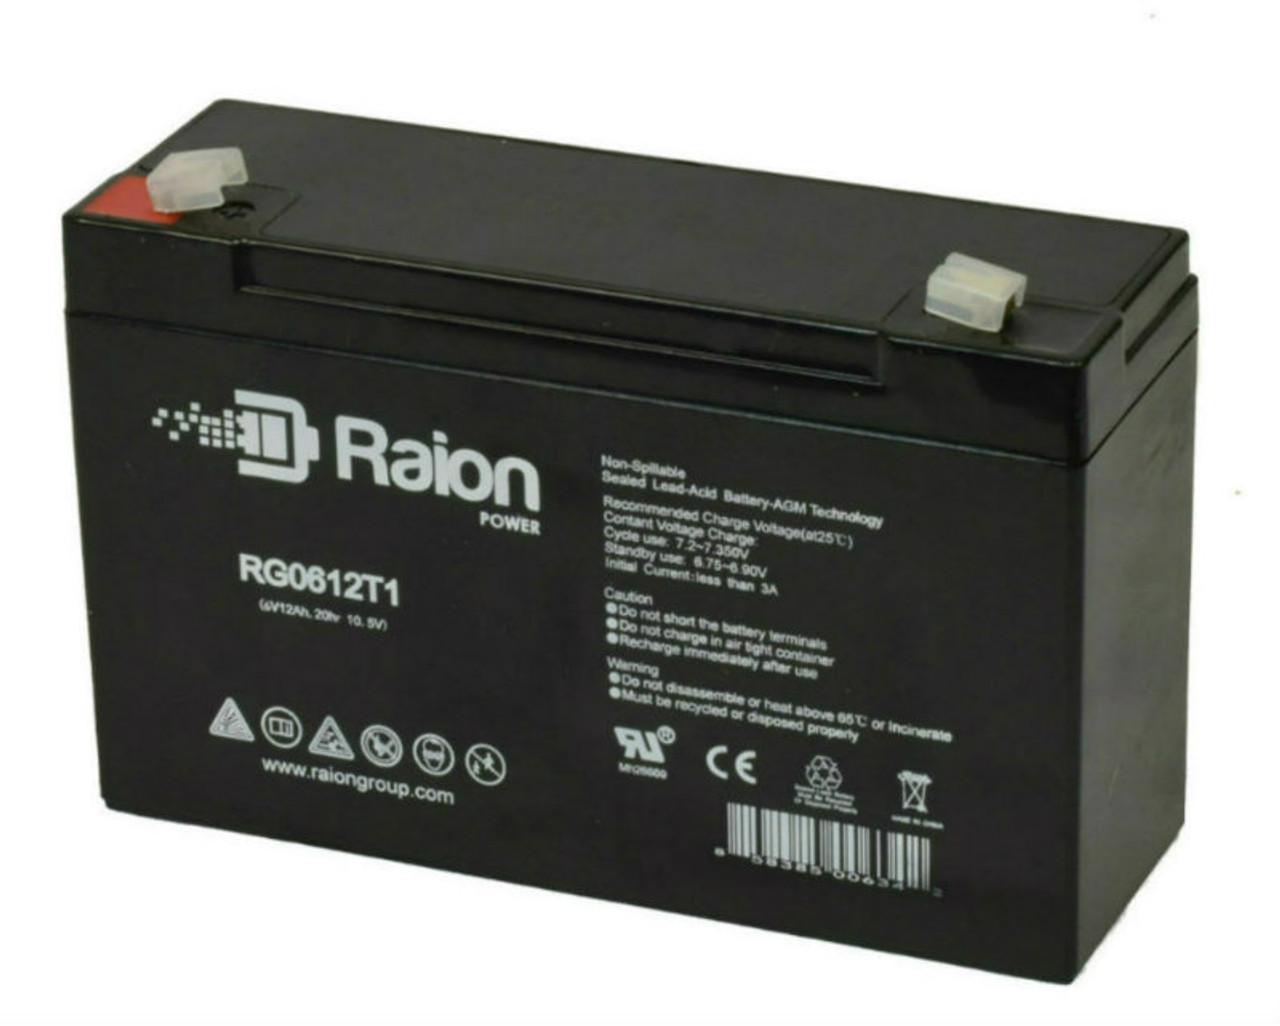 Raion Power RG06120T1 Replacement Emergency Light Battery for Holophane EH12